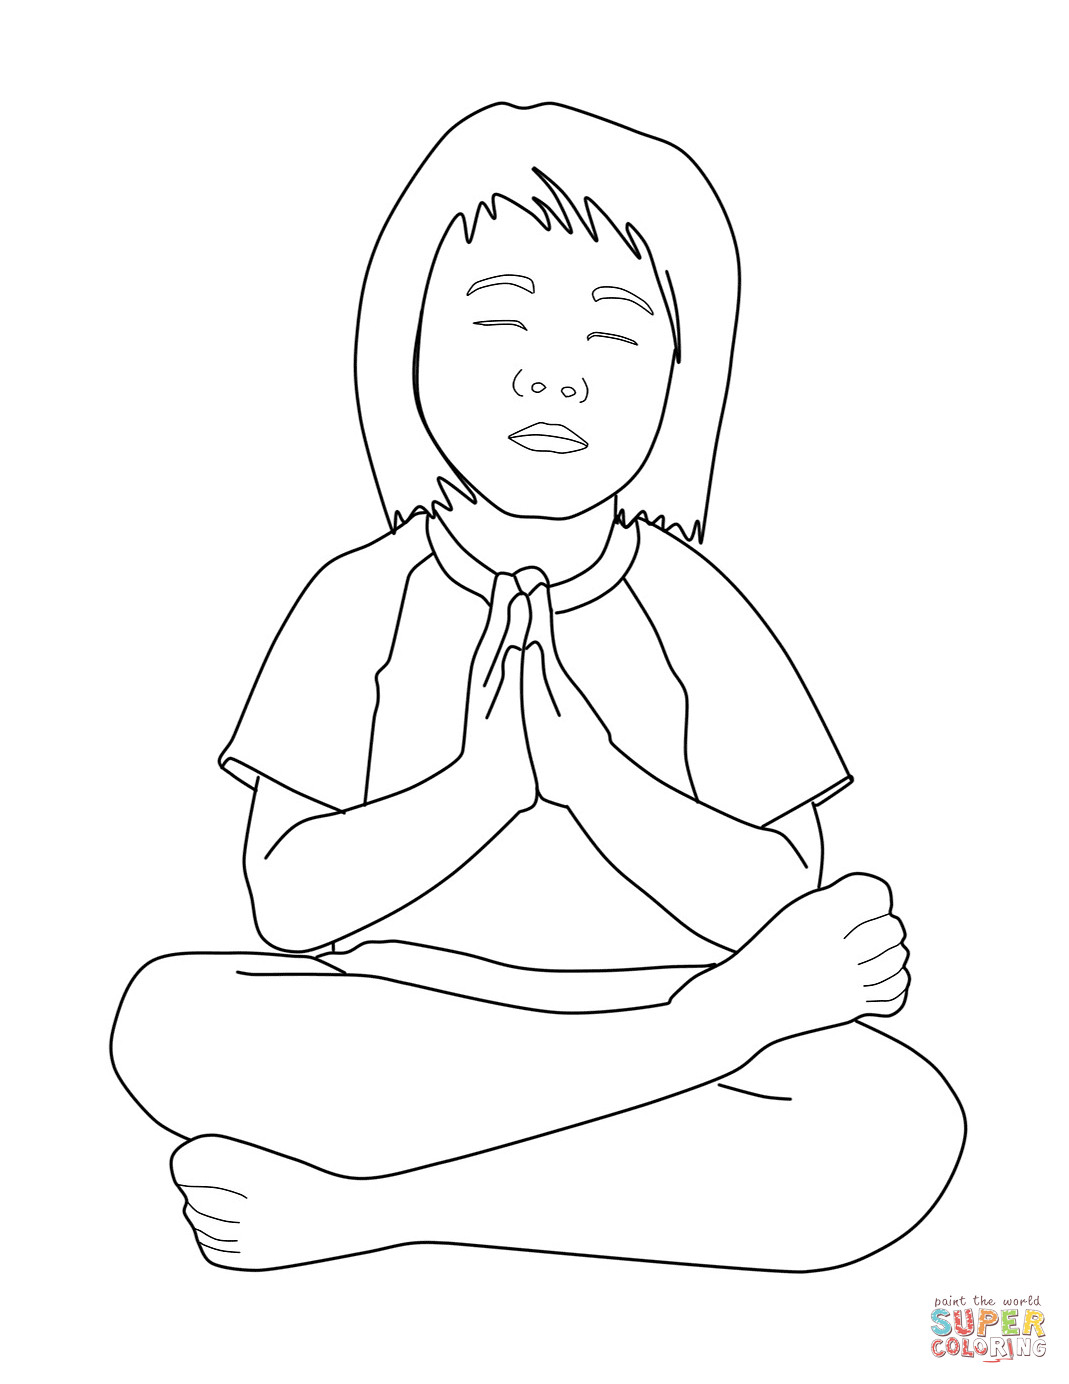 Child Coloring Pages
 Praying Child coloring page